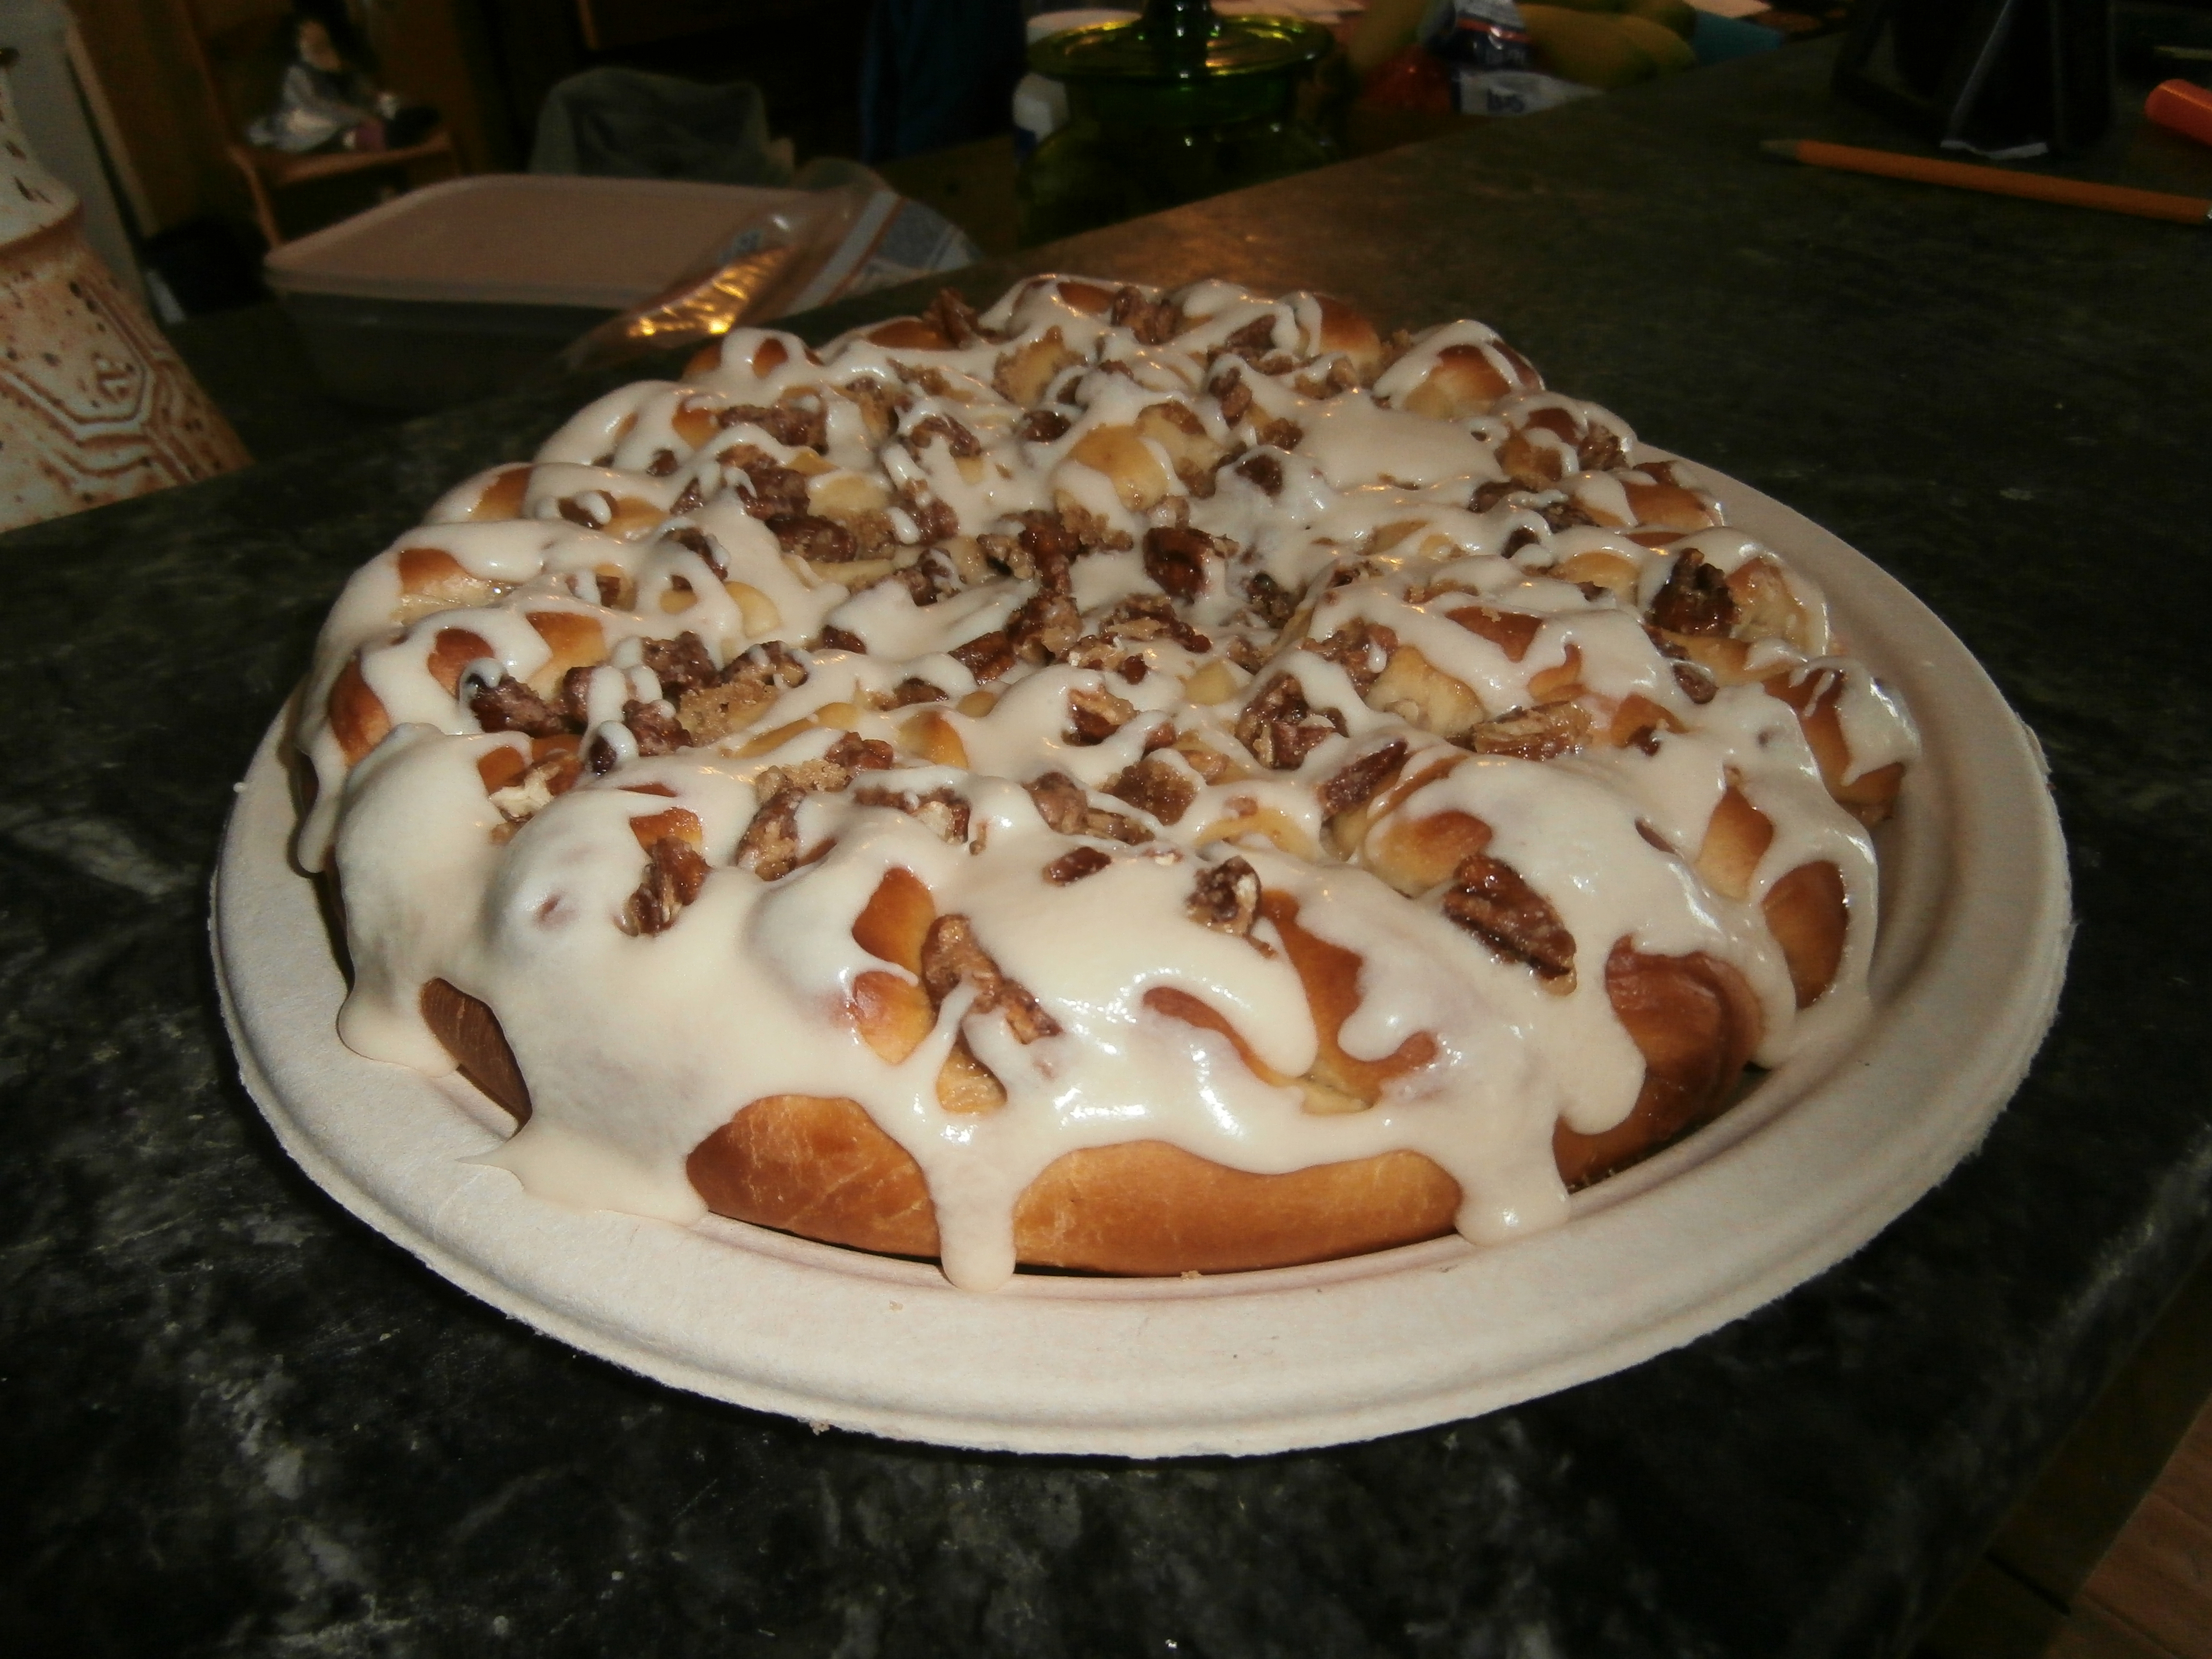 The dough shaped into a Maple Cream Cheese Coffee Cake.